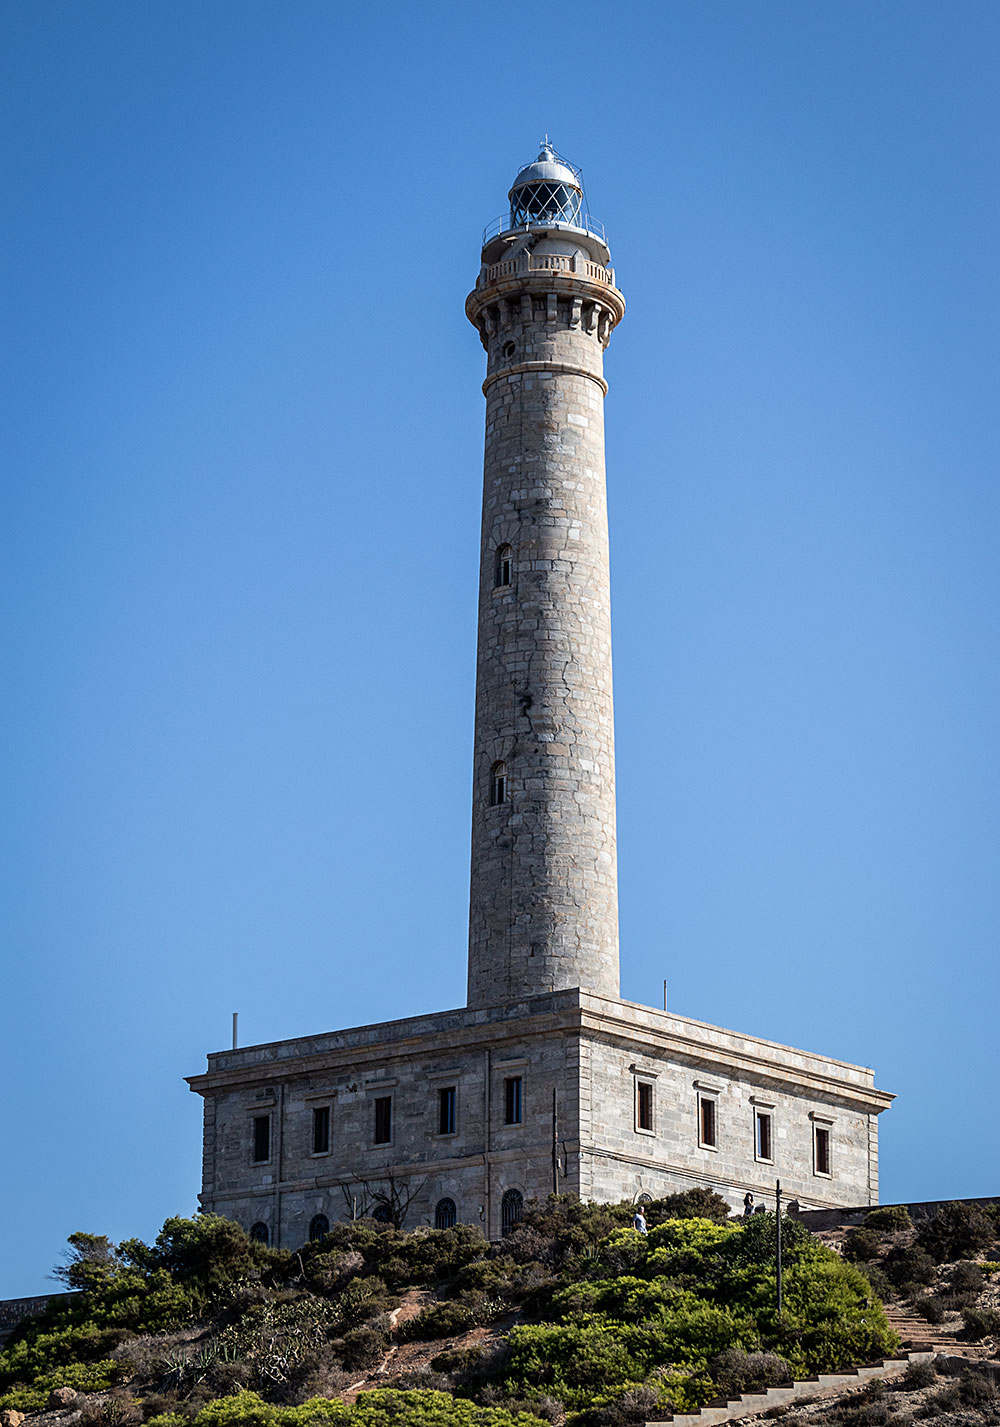 Get great views from the lighthouse in Cabo de Palos in Murcia.